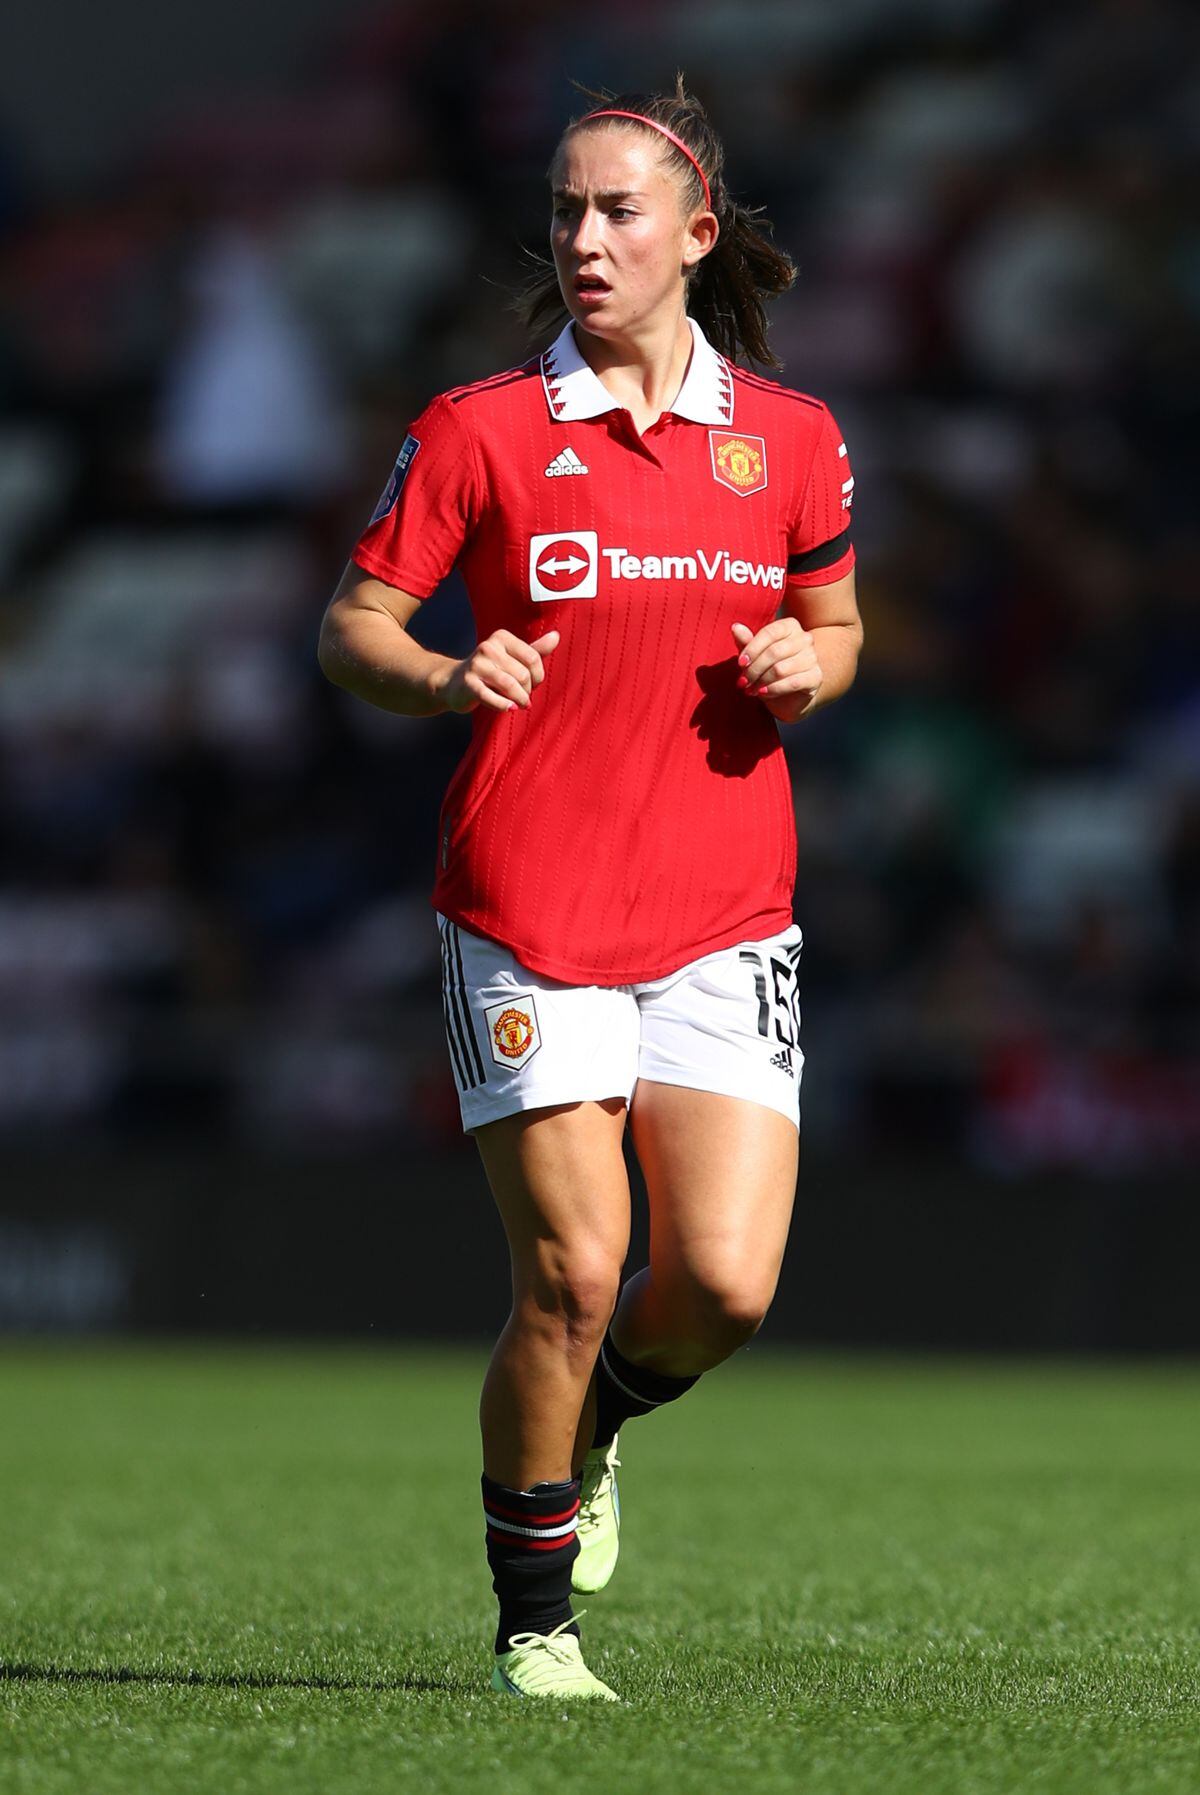 Manchester United's Maya Le Tissier during the Women's Super League match at the Leigh Sports Village, Manchester. (31279167)